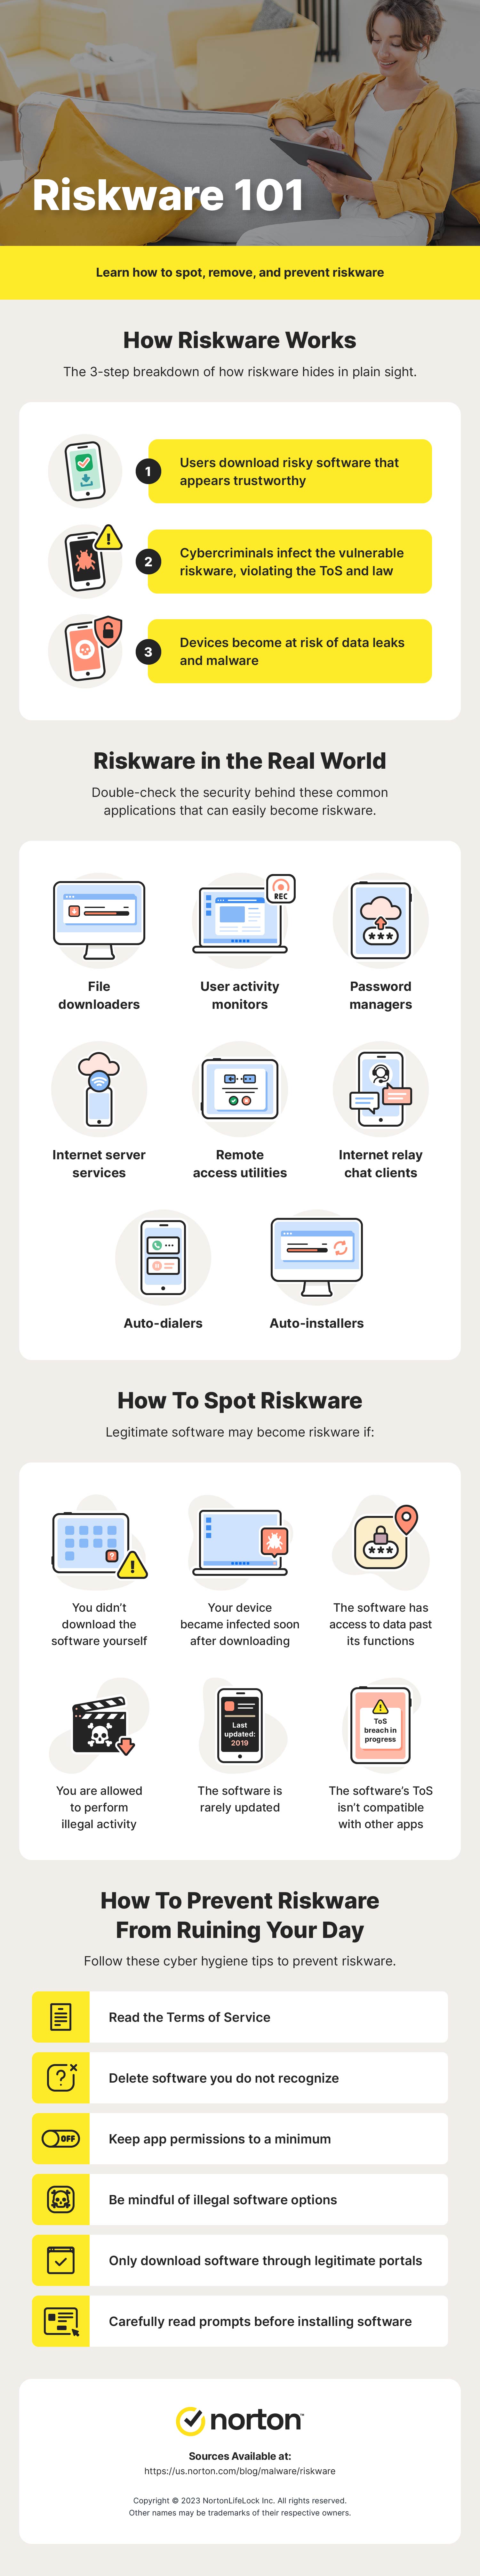 An infographic shares how to spot, remove and prevent riskware.